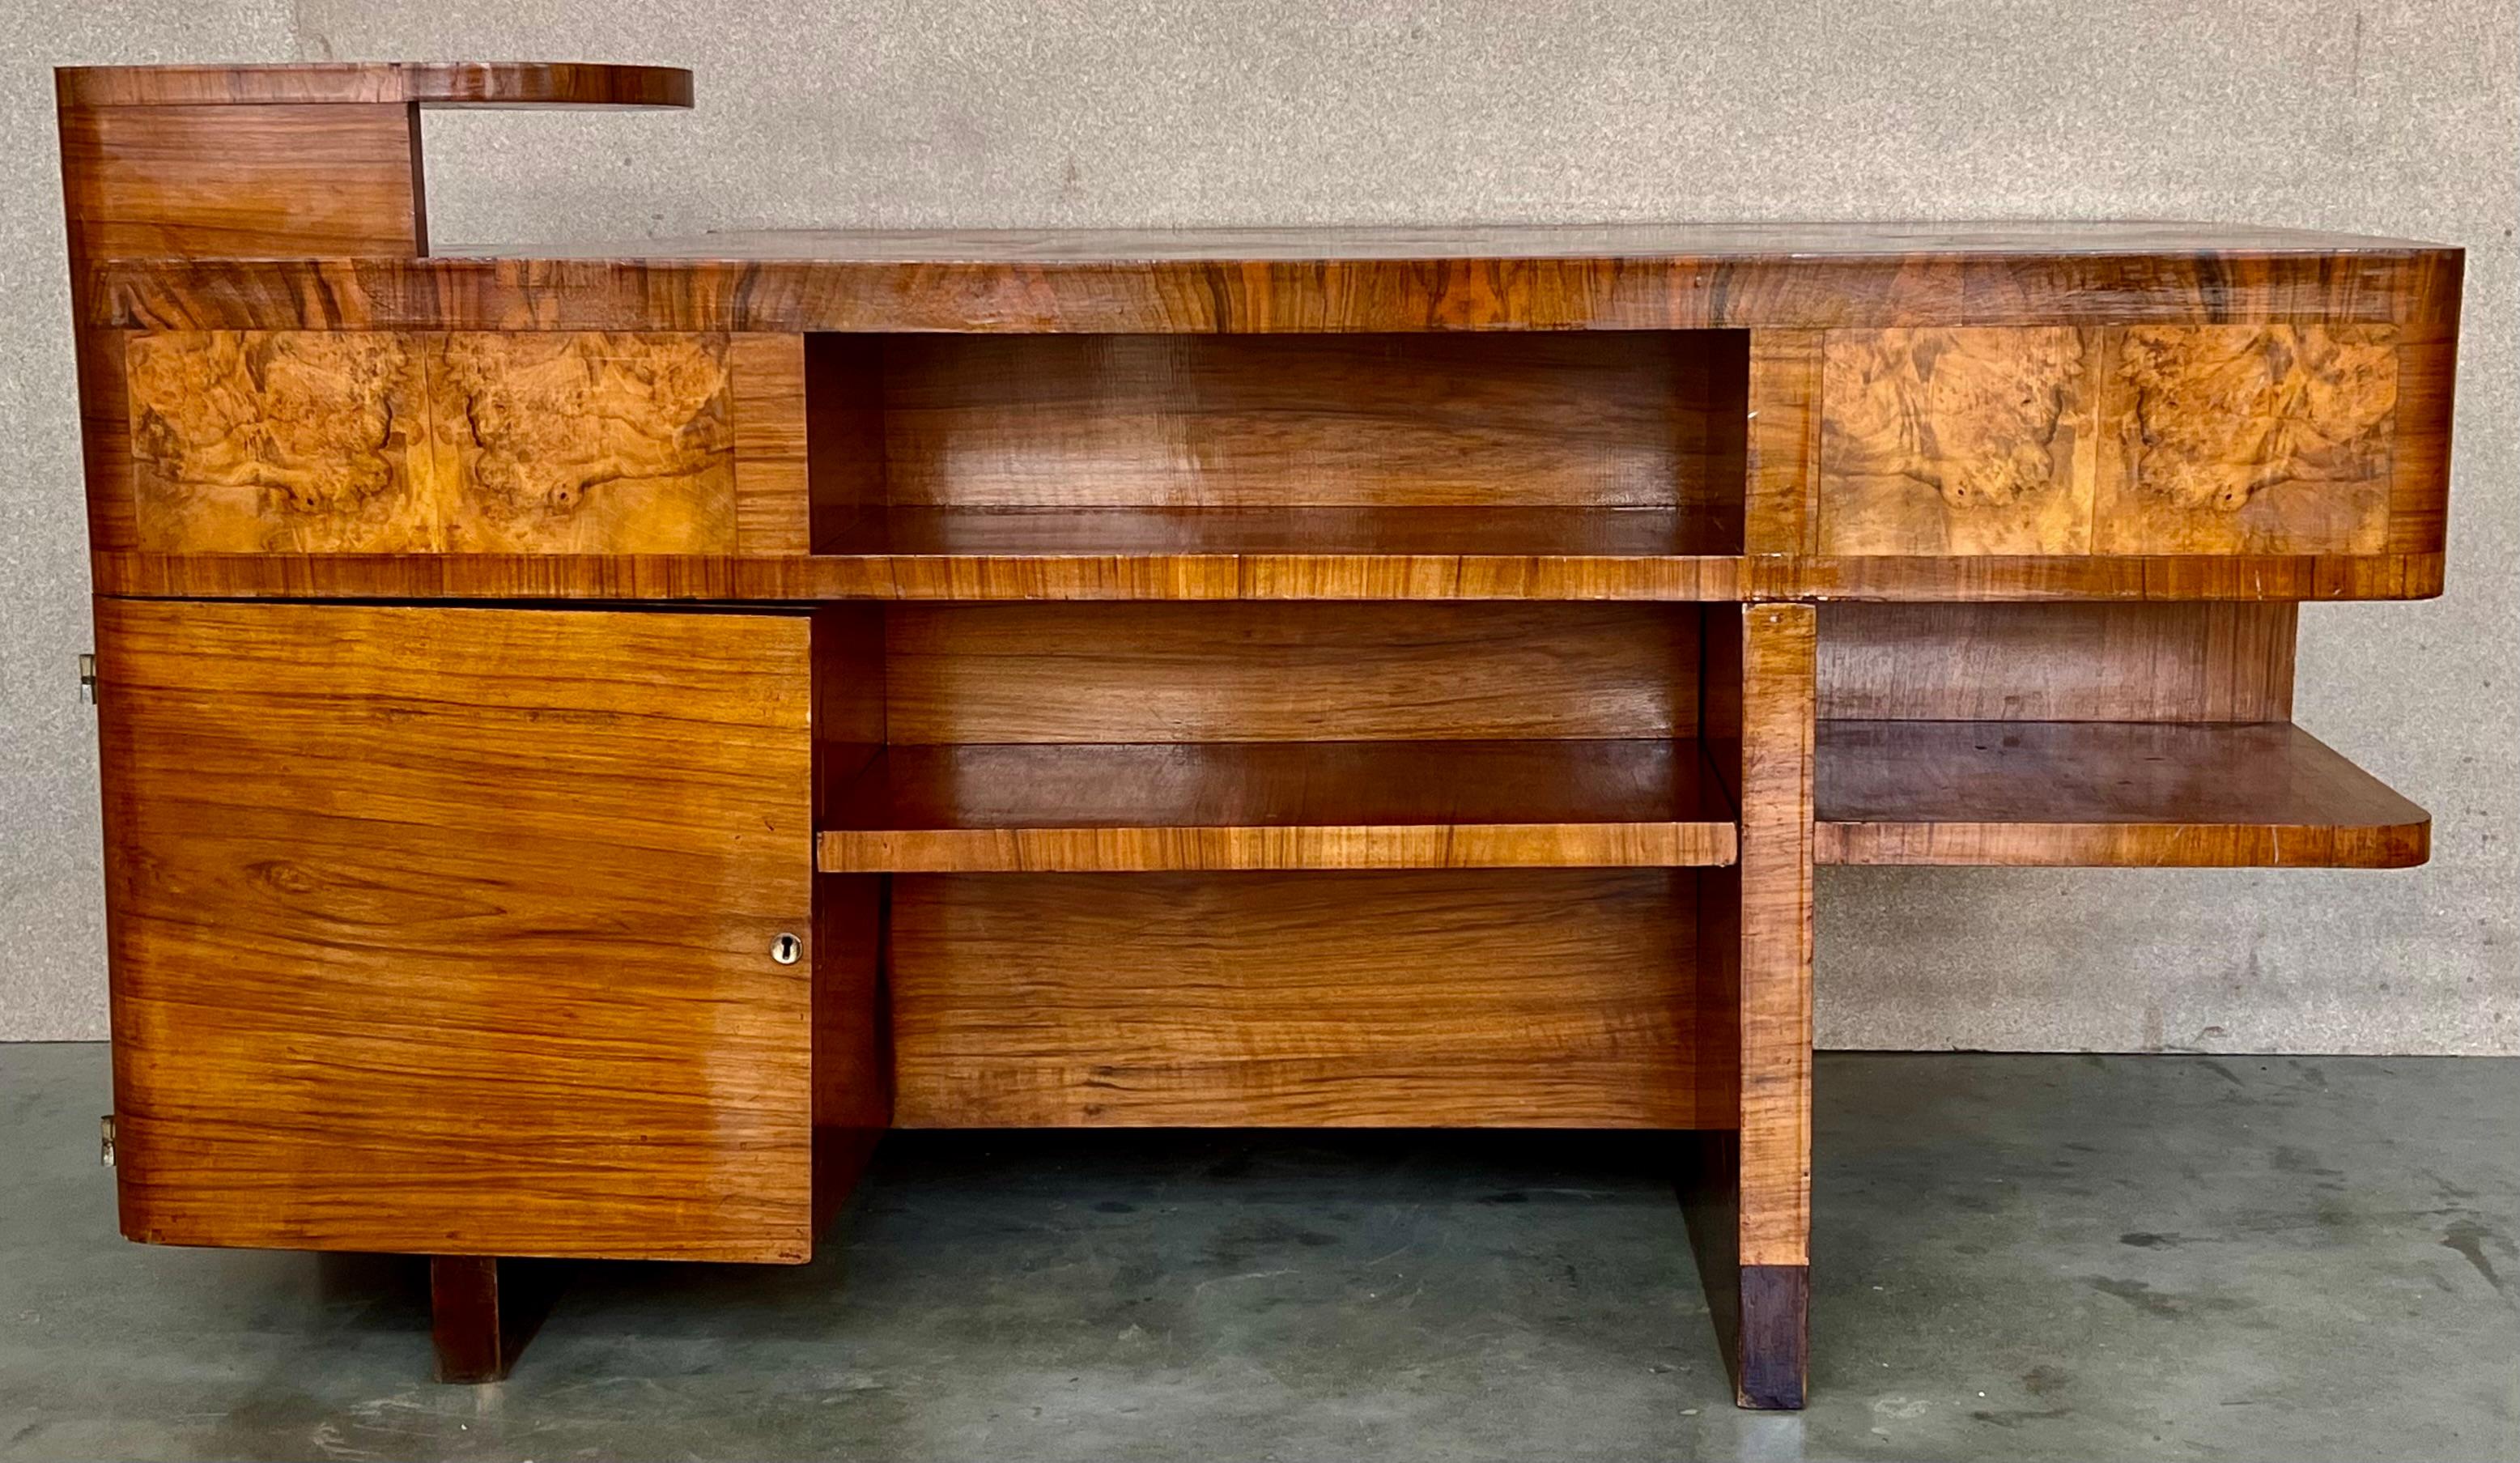 Art Deco Desk in Burl Walnut.
Beautiful Desk with two faces. In one side you can use like a desk, with five drawers and three compartments to organize your work,.
In the other side you have a big compartment closed by a door and three spaces .The